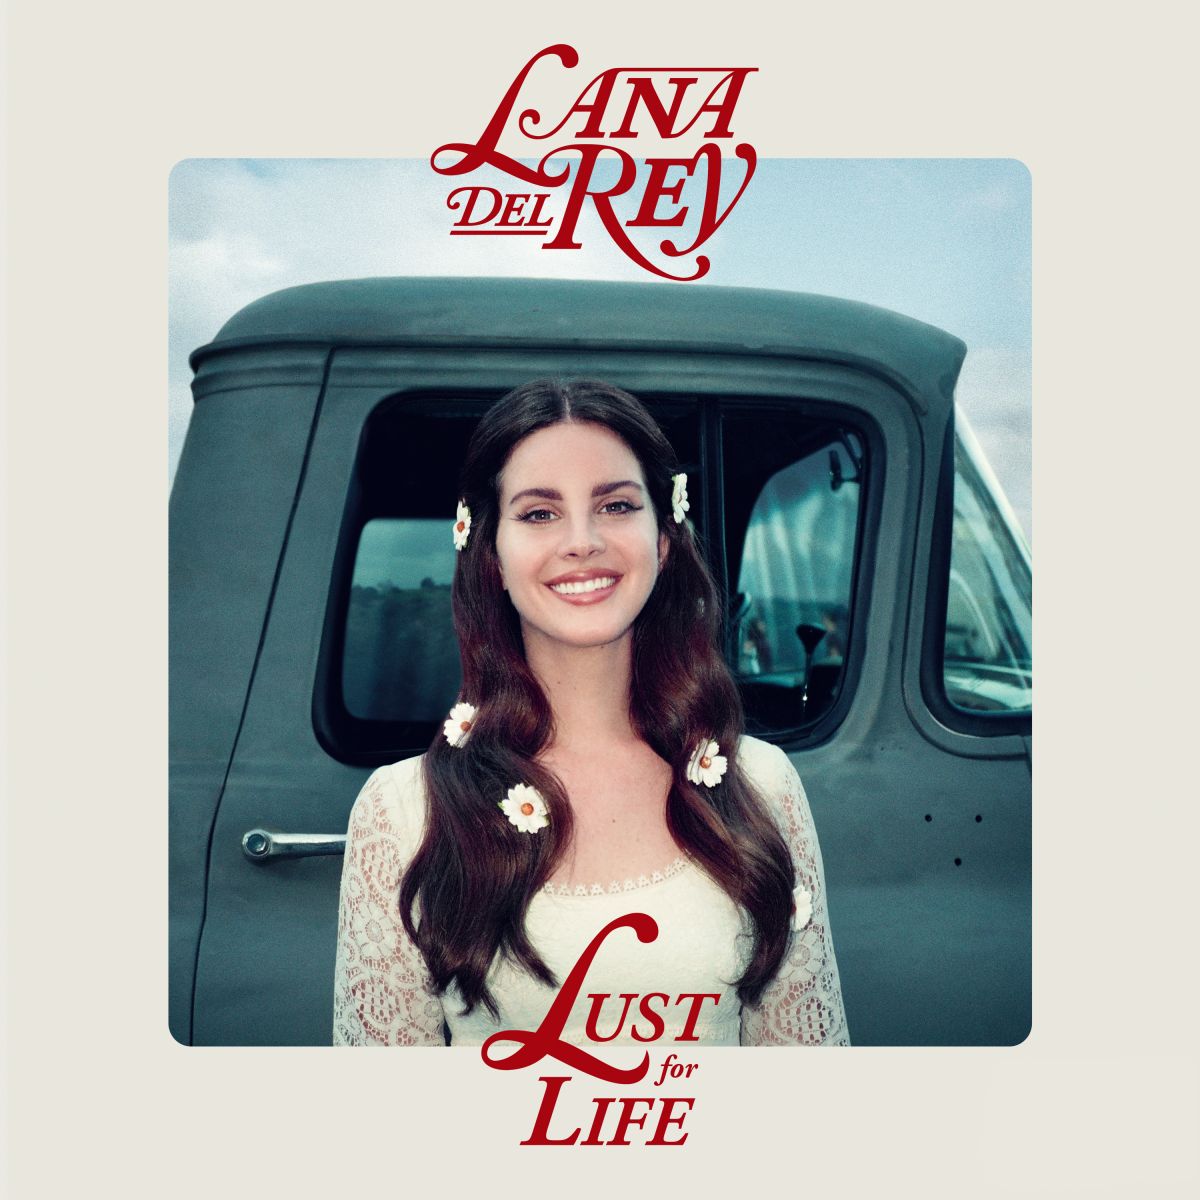 Here's Everything We Know About Lana Del Rey's New Album <i></noscript>Lust for Life</i> [UPDATE]” title=”lana-del-rey-lust-for-life-1499700072″ data-original-id=”248540″ data-adjusted-id=”248540″ class=”sm_size_full_width sm_alignment_center ” data-image-source=”professional” /></p>
<p><strong>She might be a witch now</strong></p>
<p>The <em>Lust for Life</em> era finds Del Rey embracing the occult, cooking up a cauldron of musical ingredients in the <a href=